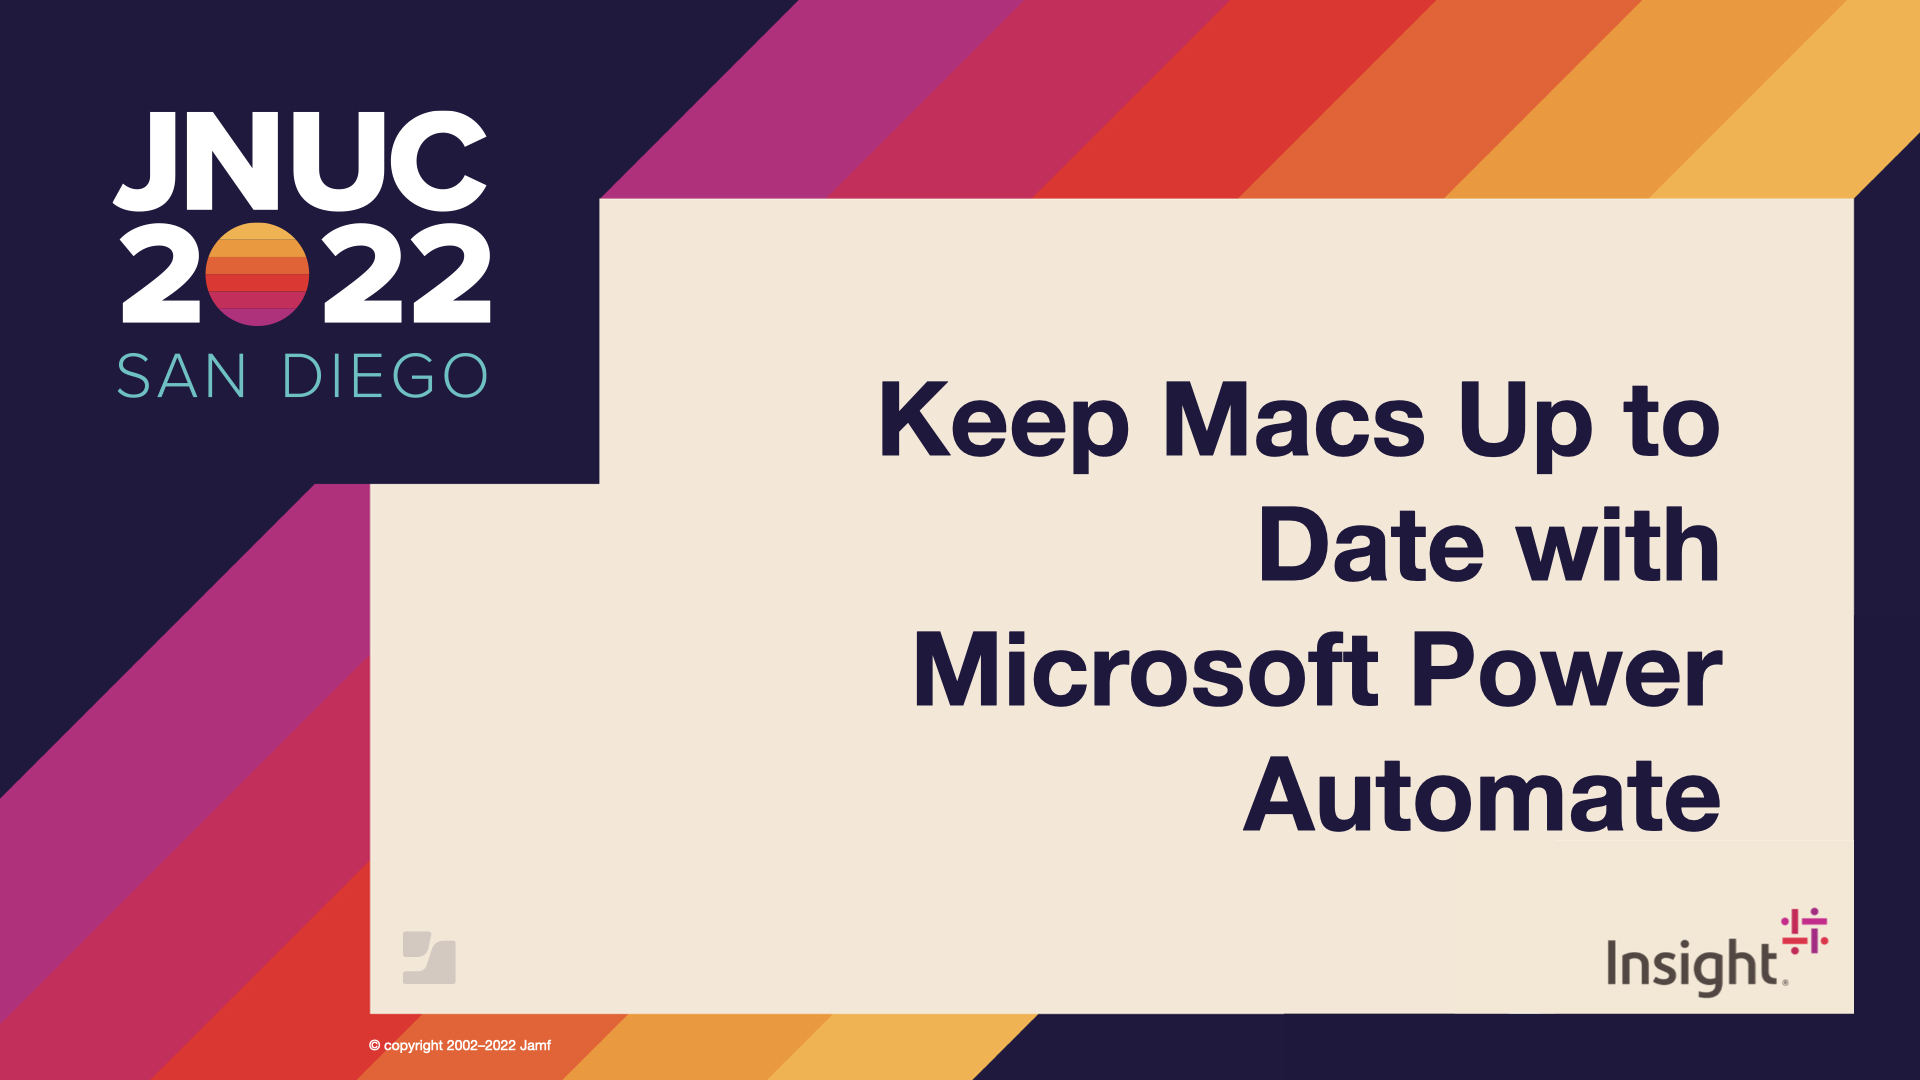 JNUC 2022 session: Keep Macs Up to Date with Microsoft Power Automate (by Insight)